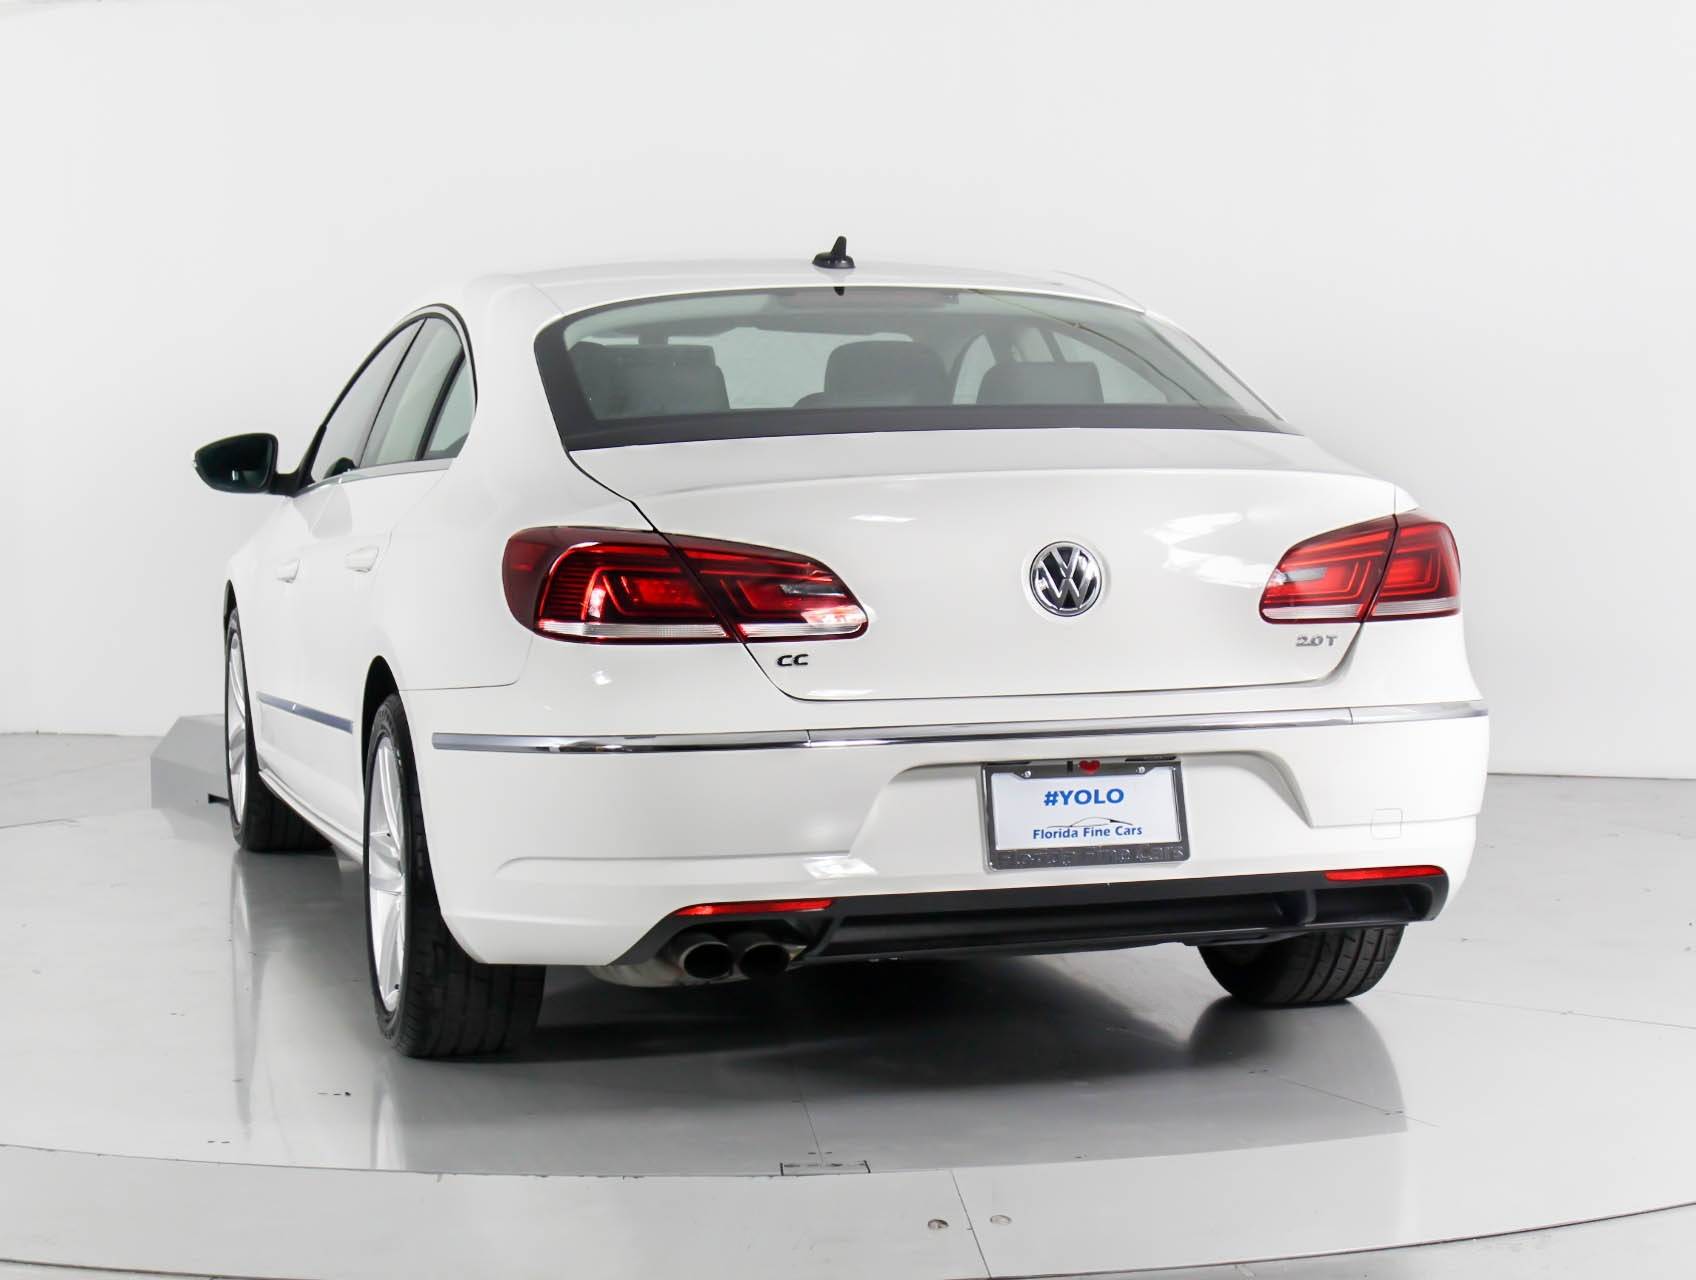 Florida Fine Cars - Used VOLKSWAGEN CC 2015 WEST PALM 2.0T SPORT